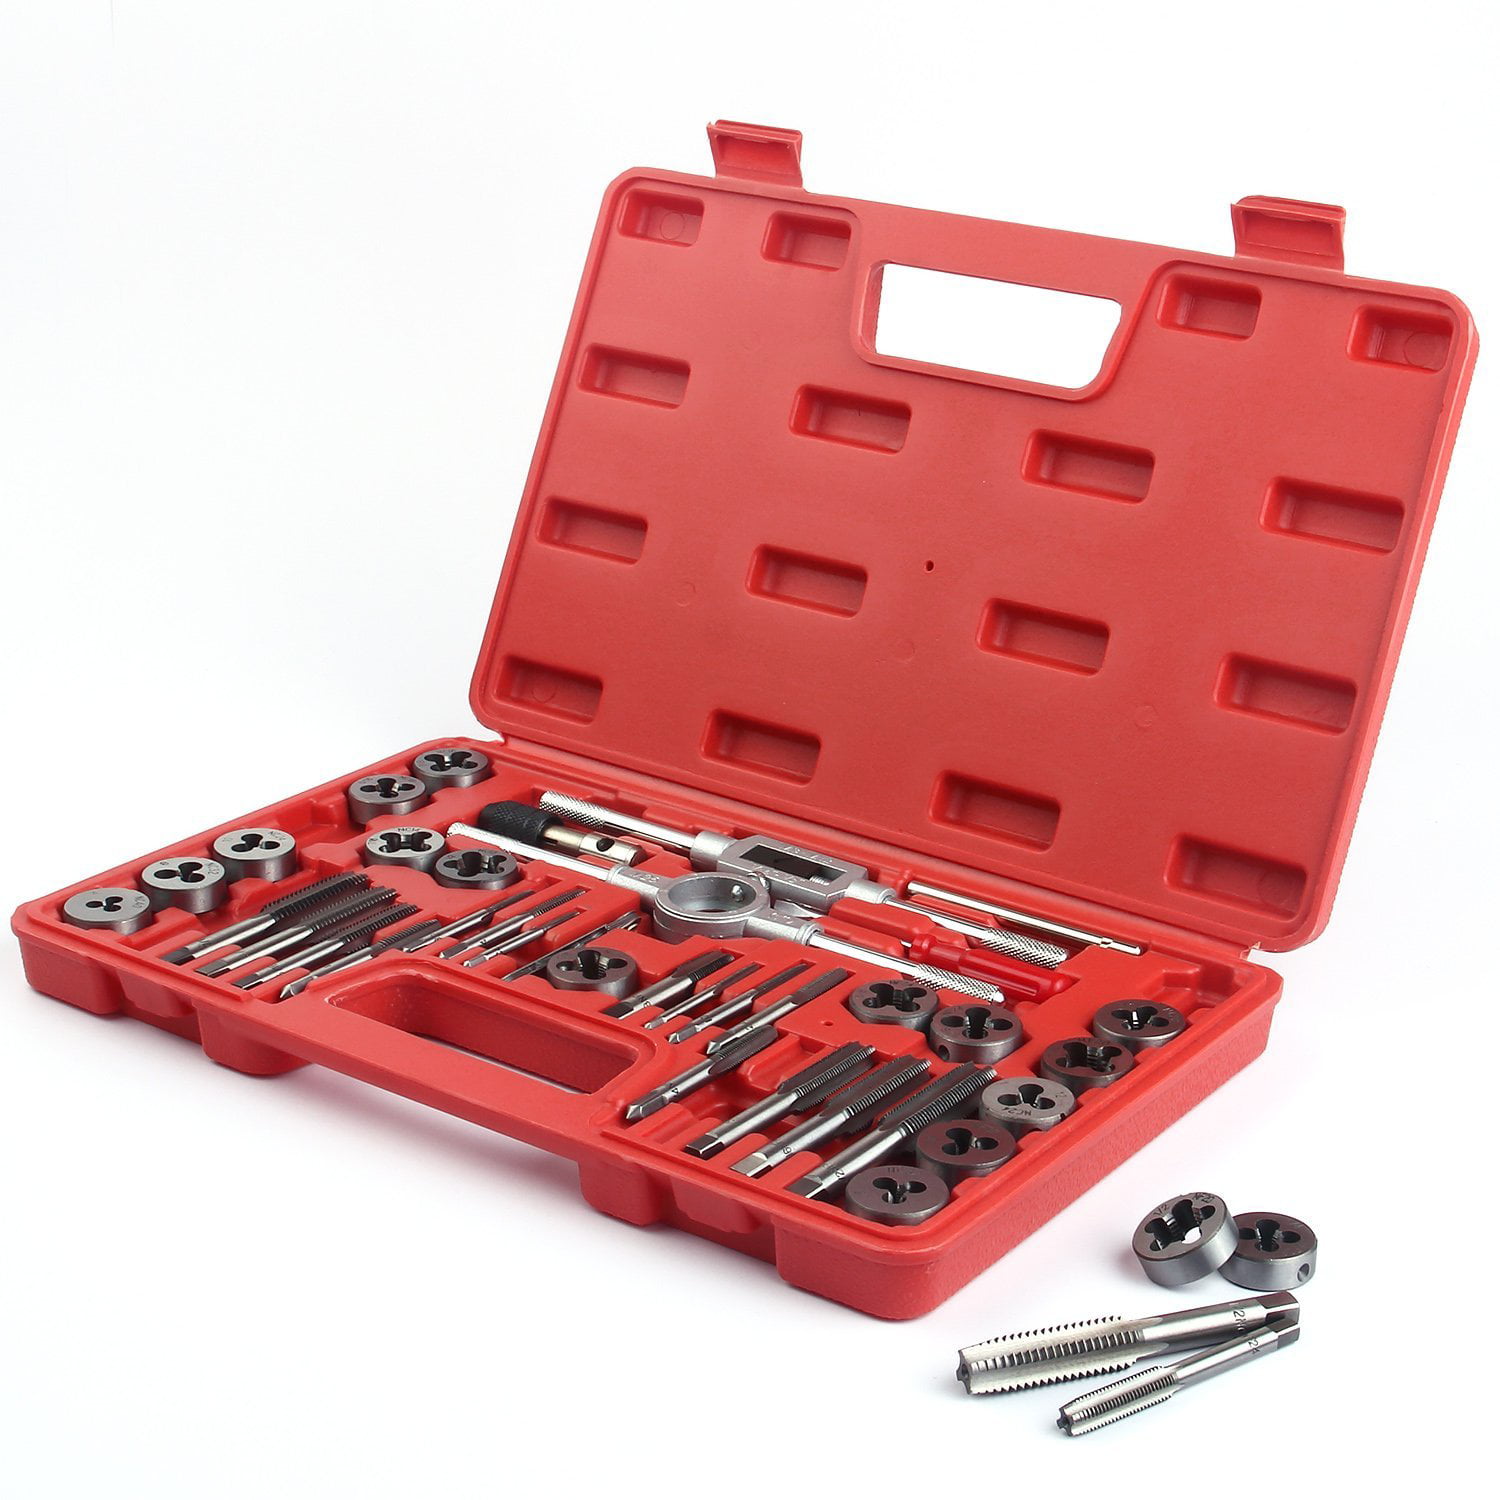 SAE Thread Types: NC 40 Piece Tap and Die Set,SAE Inch Sizes for Cutting External and Internal Threads by NAKAO NF Essential Threading Tool with Complete Accessories and Storage Case NPT 